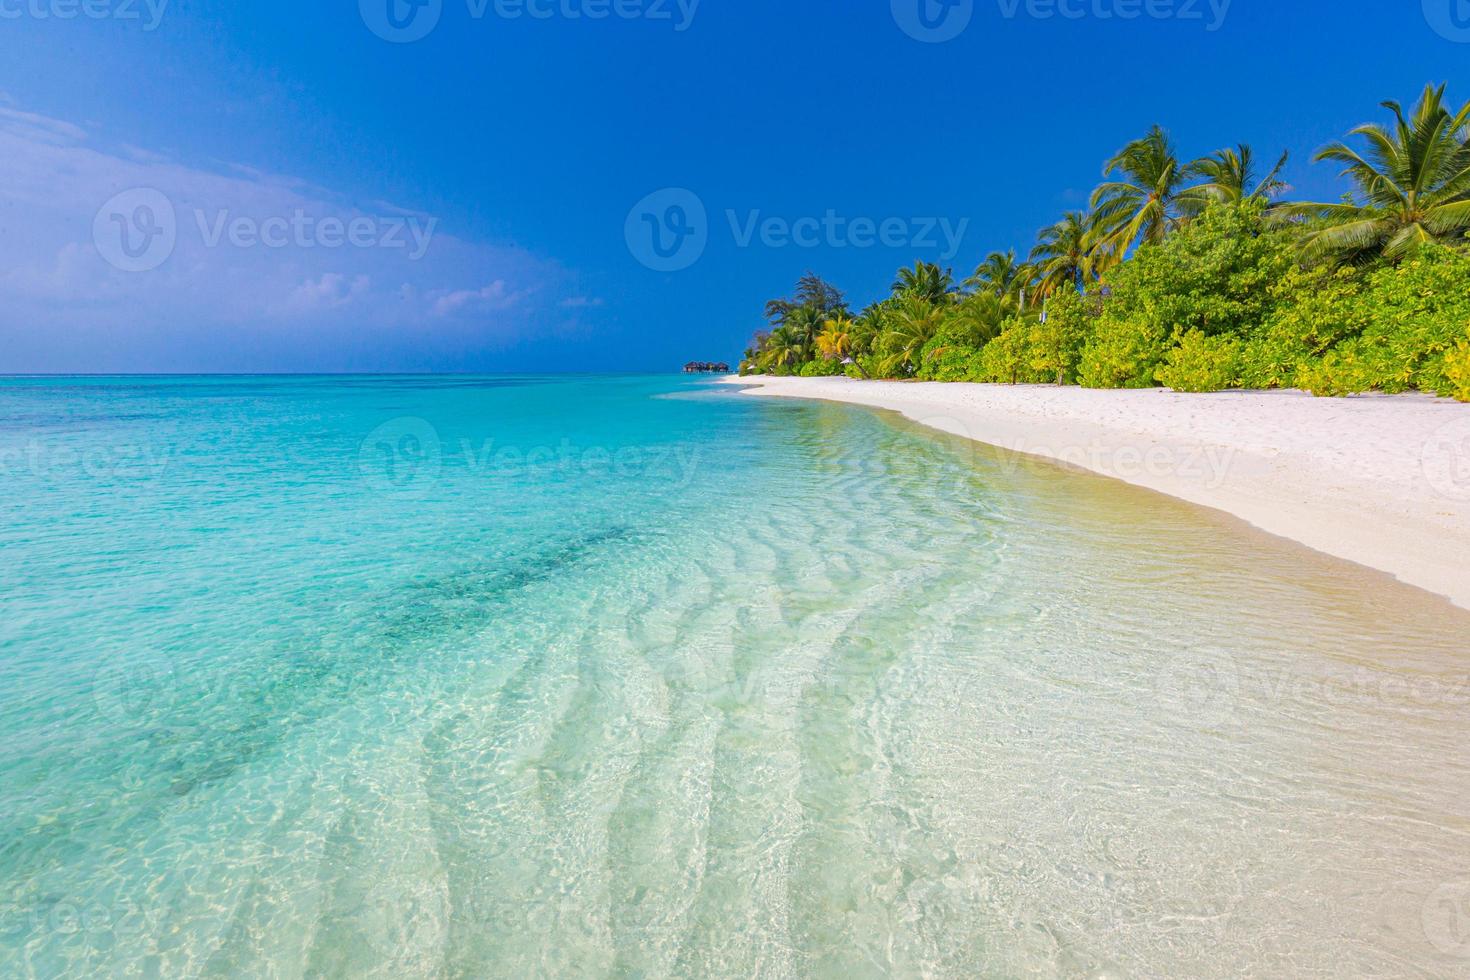 Sunny exotic tropical beach landscape background wallpaper. Design summer vacation holiday concept. Luxury travel destination, idyllic nature scenic palm tree leaves, amazing natural environment photo